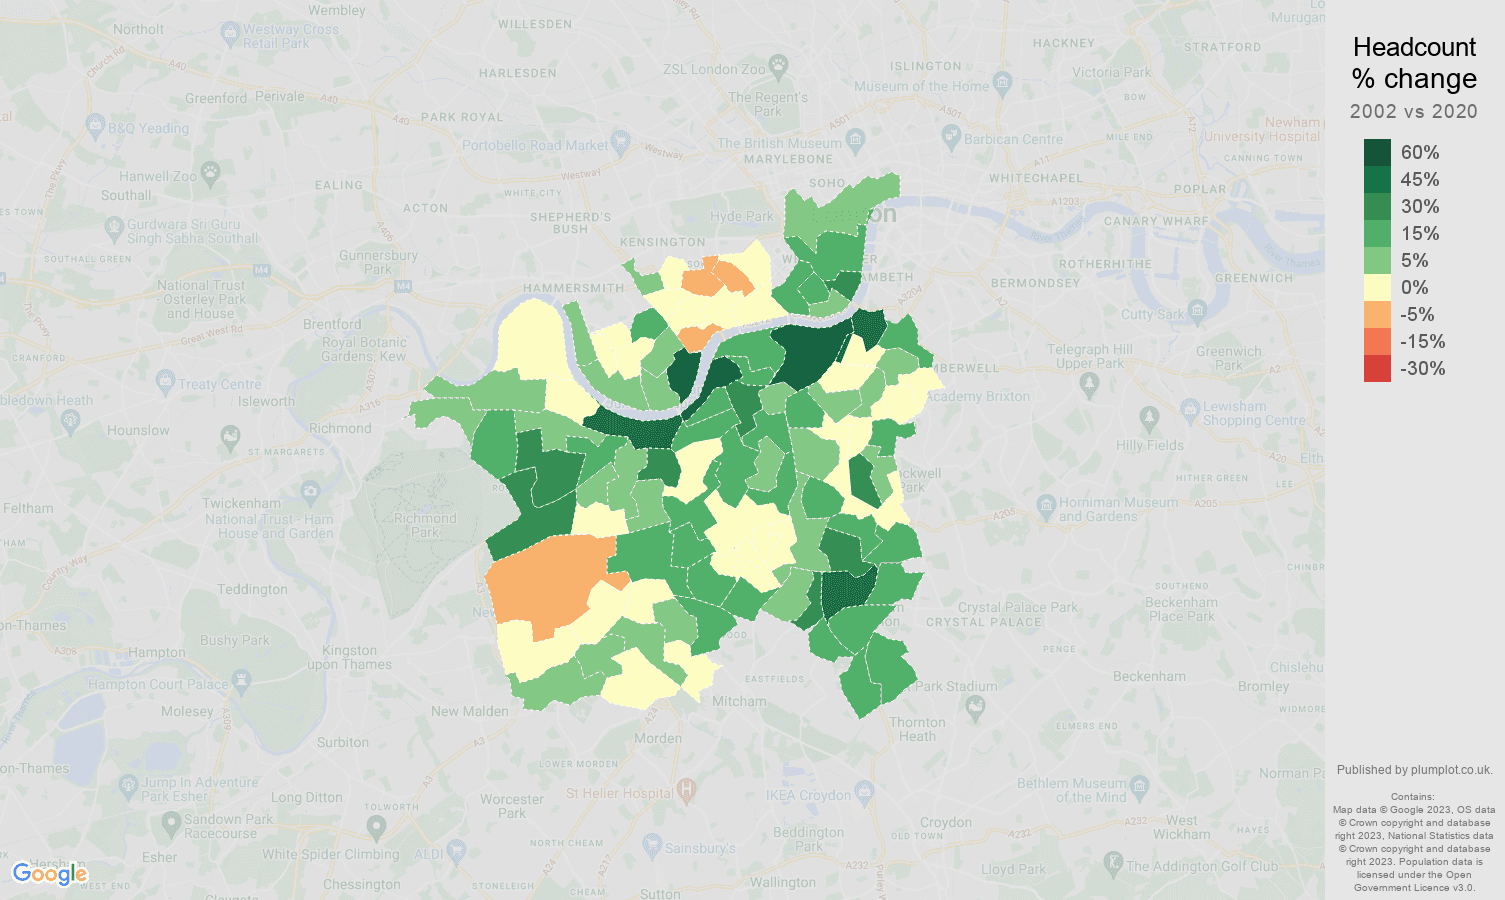 South West London headcount change map